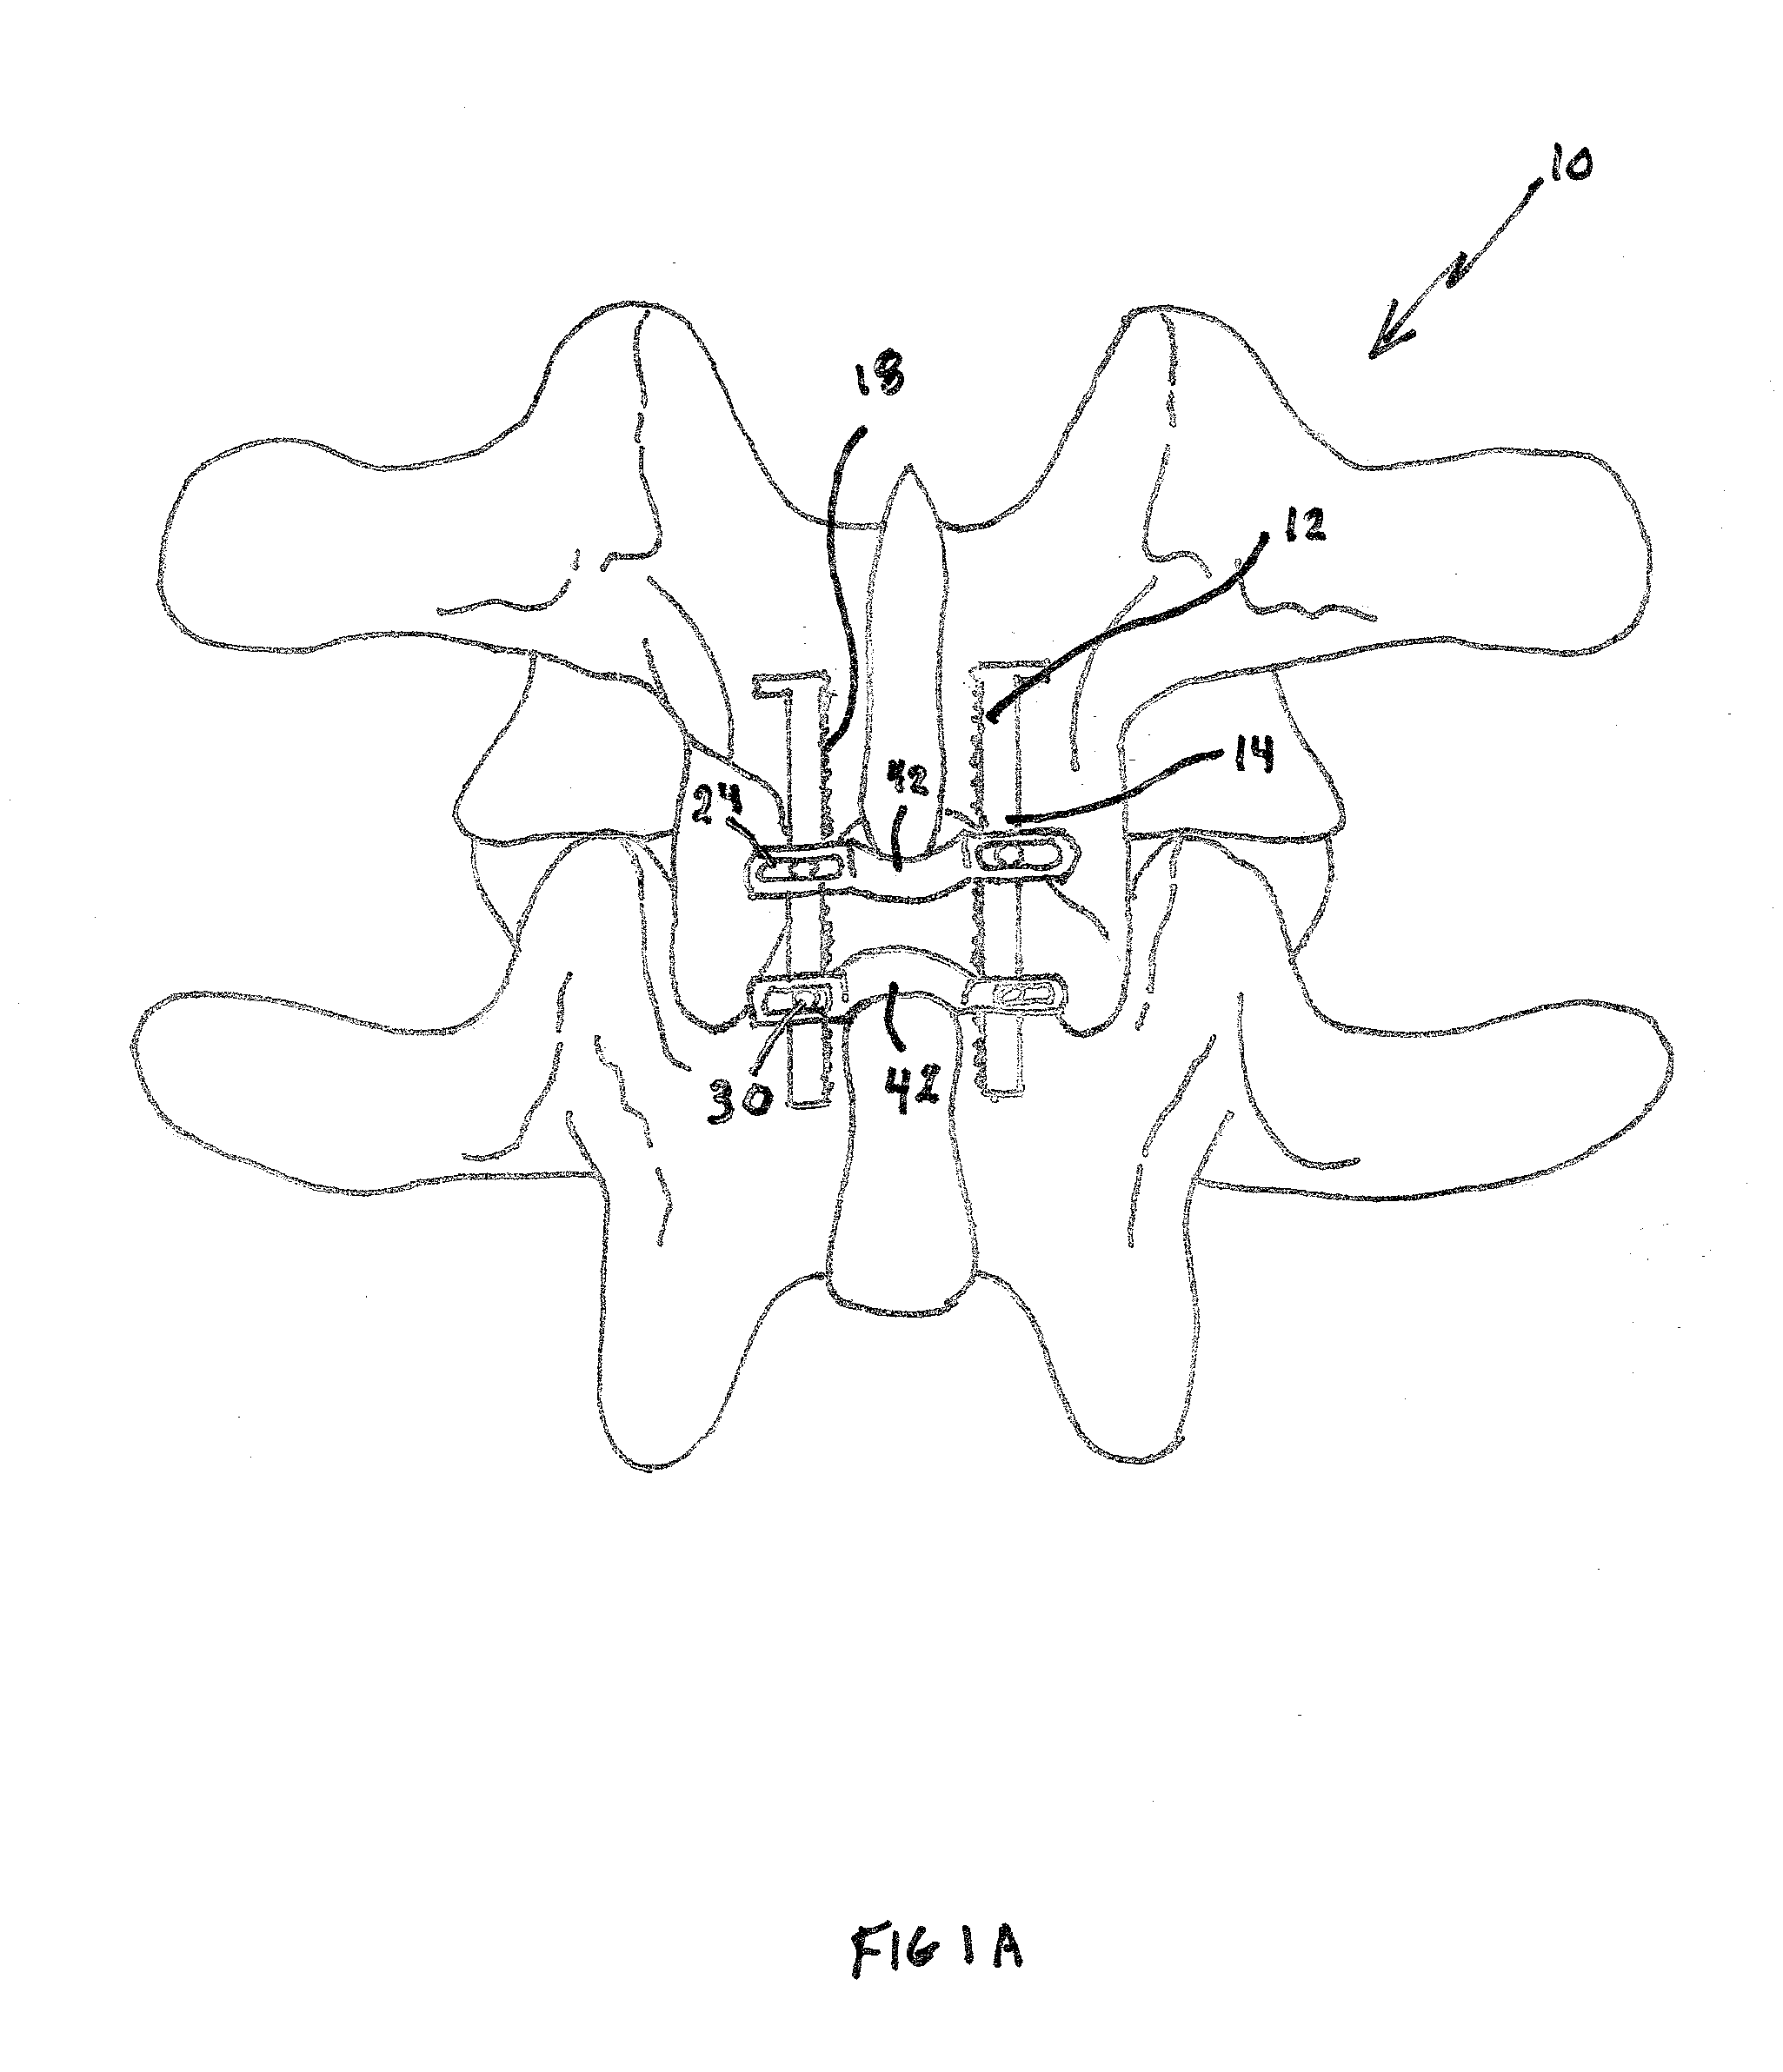 Adjustable spinous process spacer device and method of treating spinal disorders